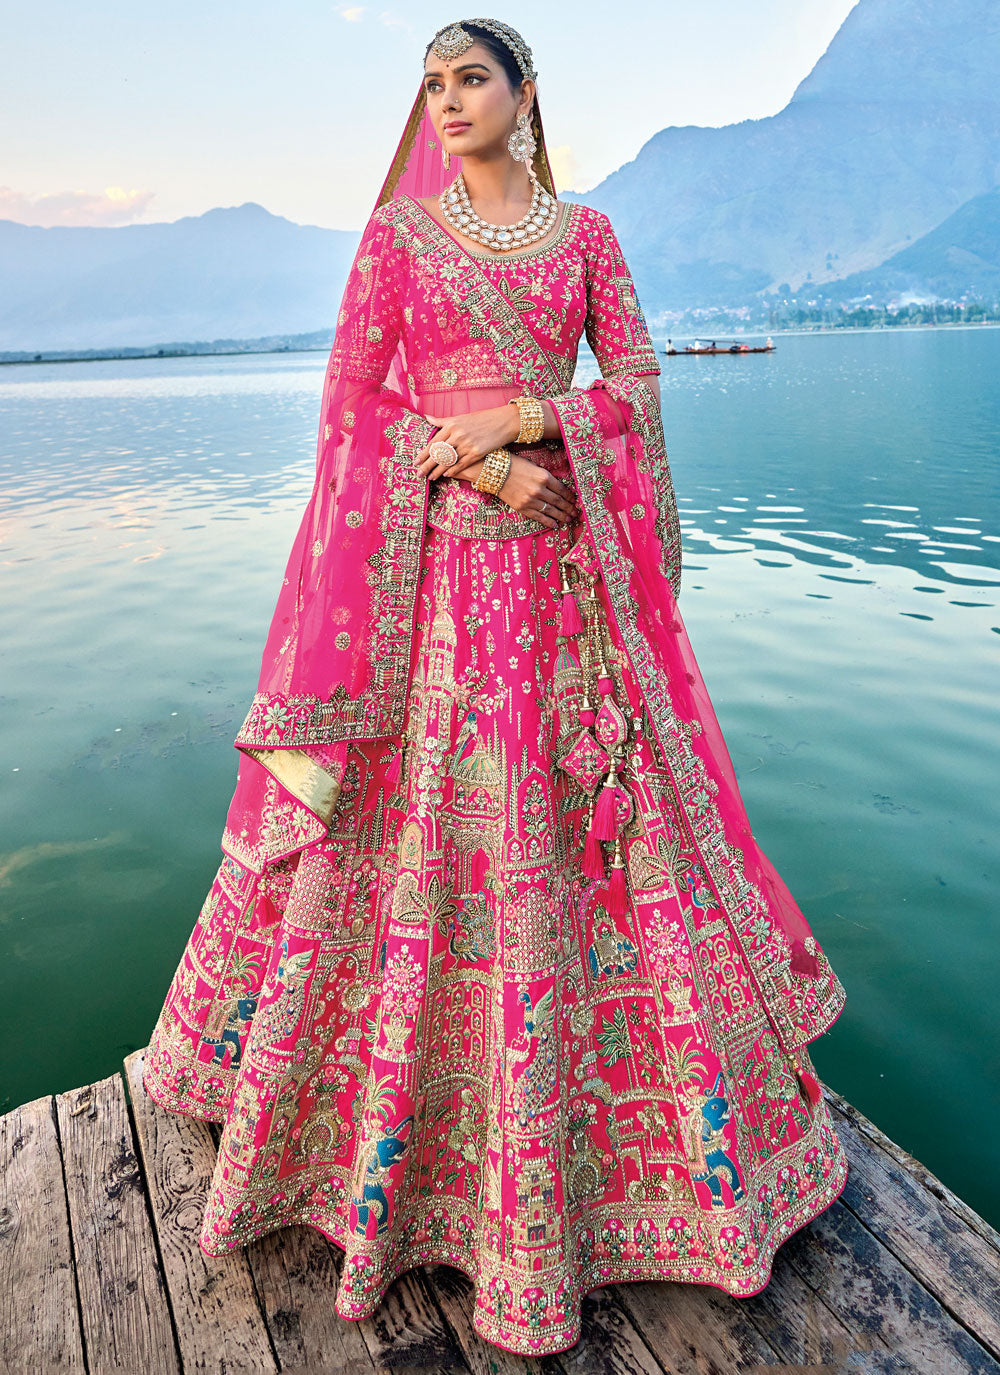 Embroidered, Sequins, Thread And Zari Work Silk Lehenga Choli In Pink For Bridal